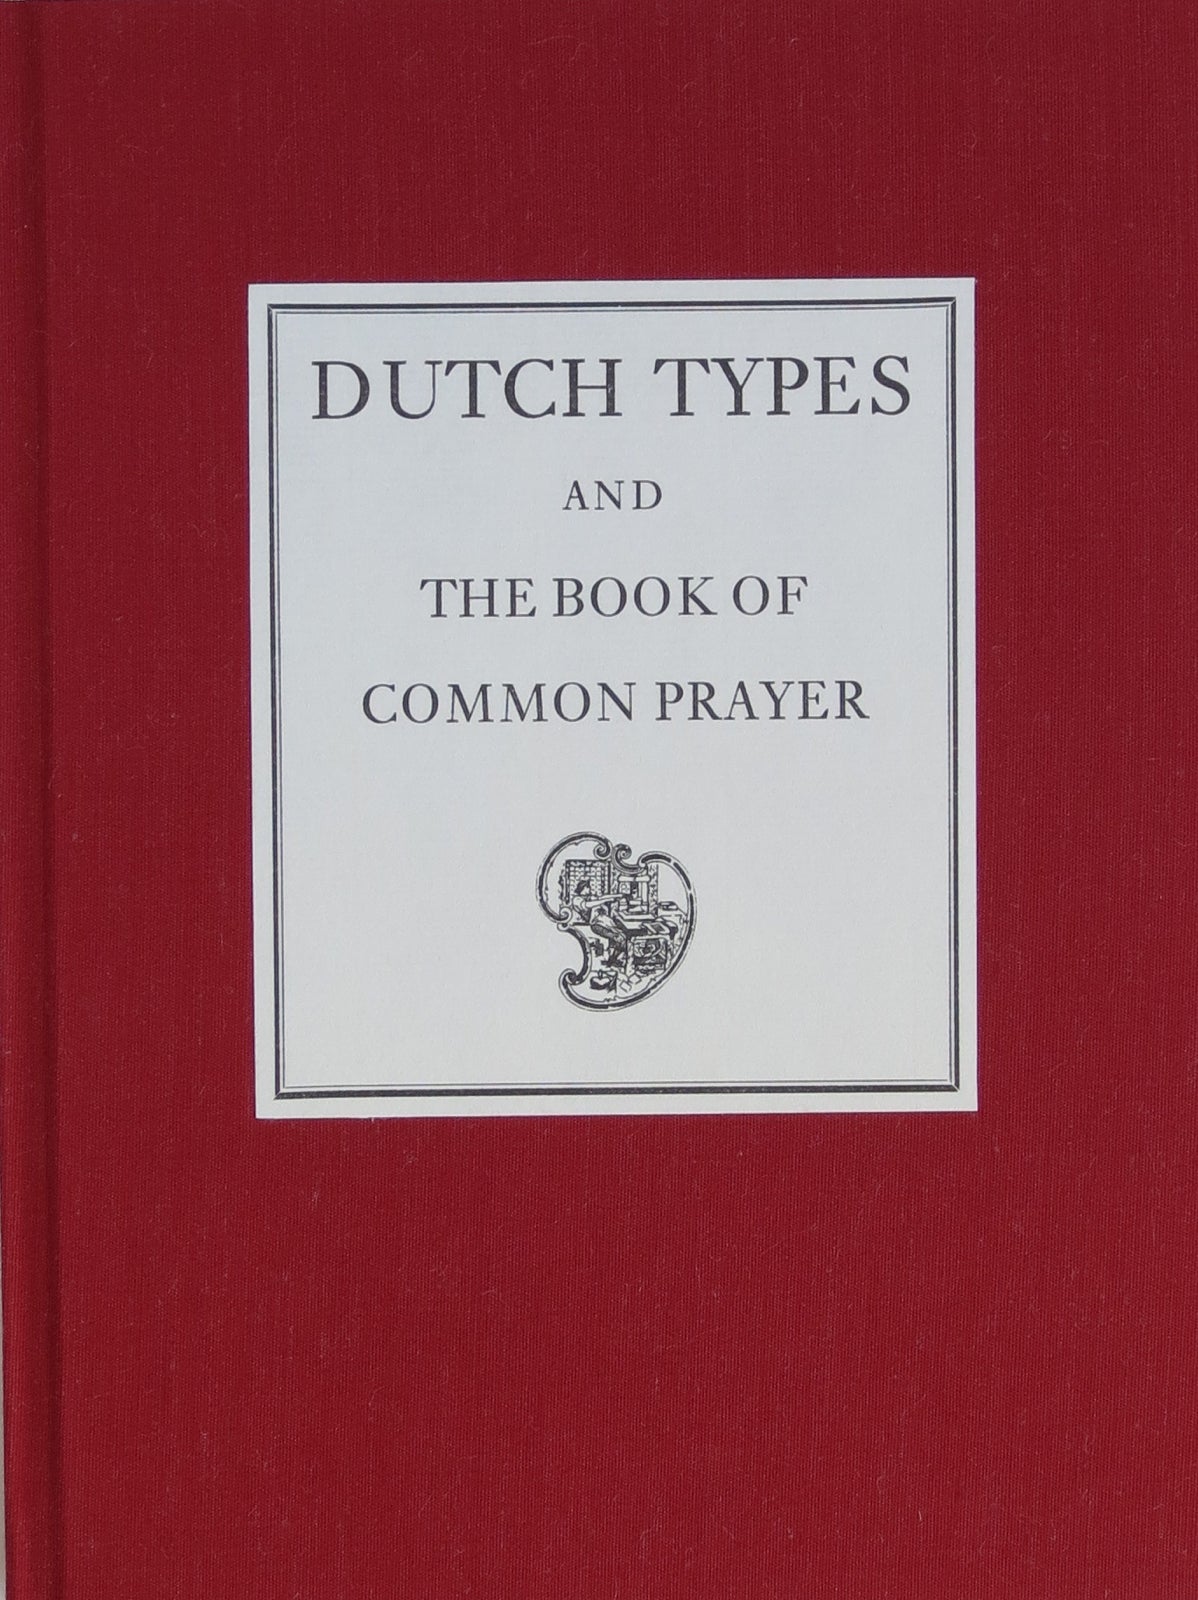 Dutch Types Used in the English Book of Common Prayer 1911-1930. Steven G. Heaver